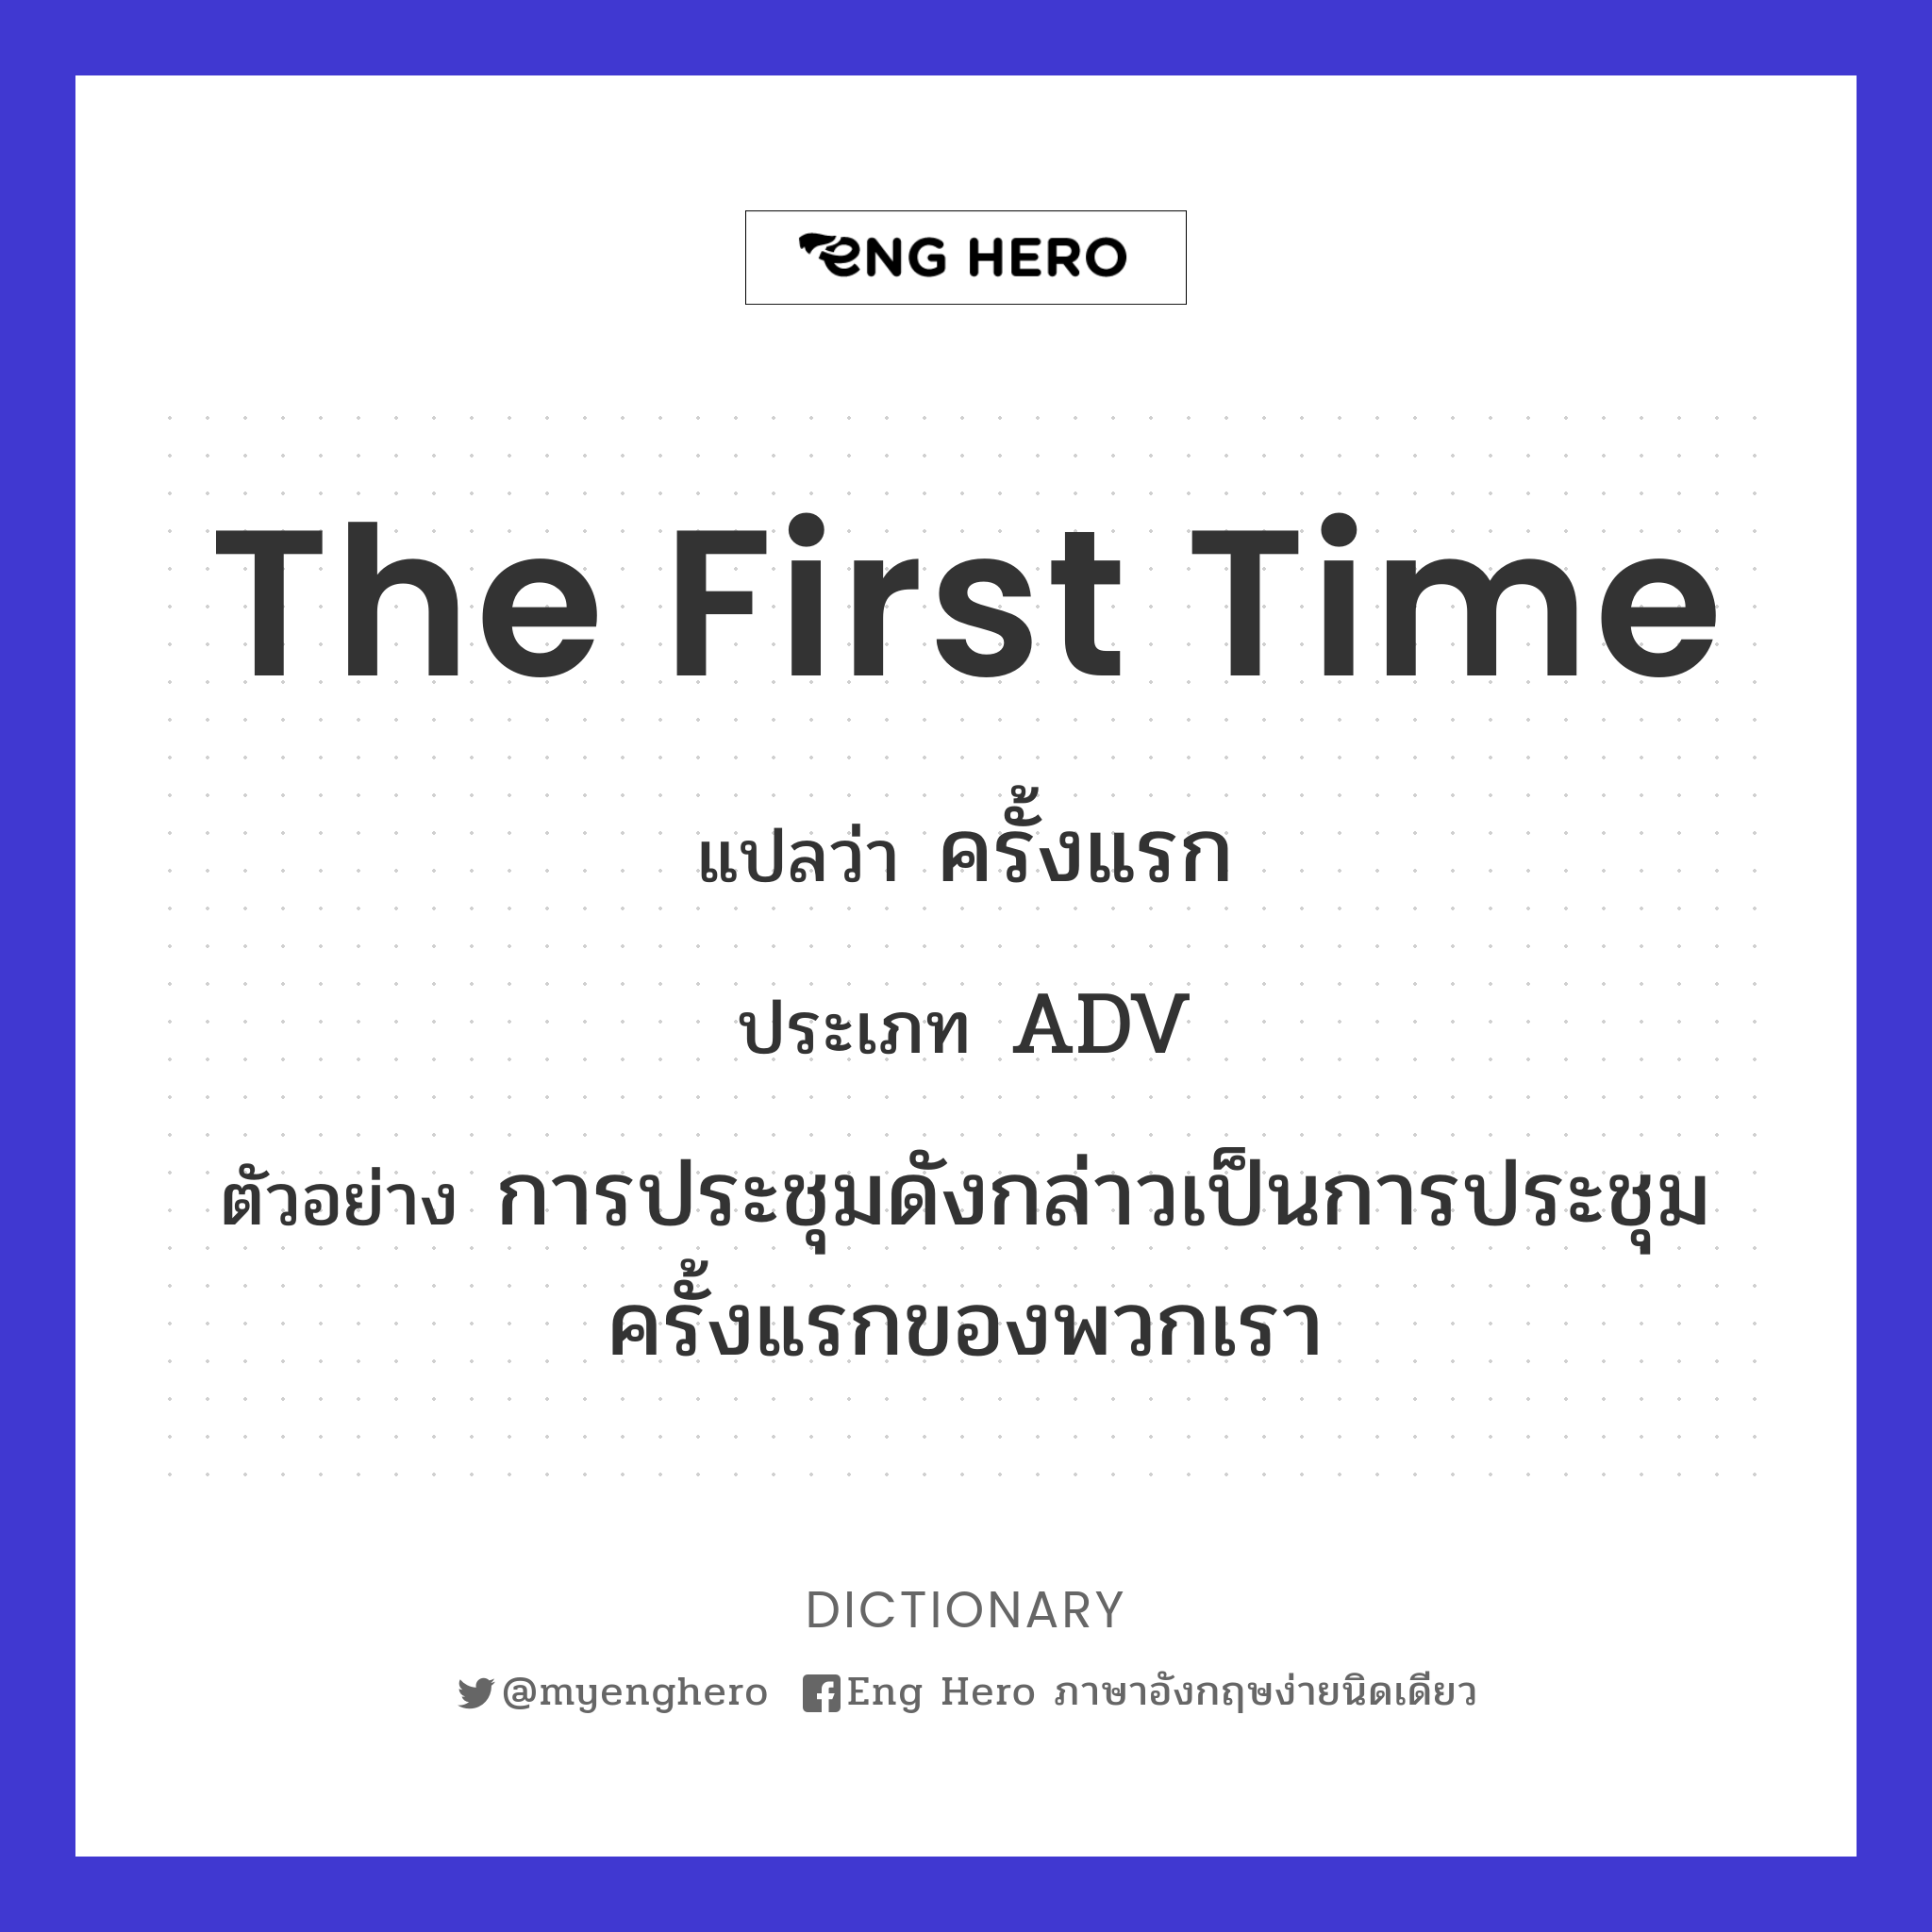 the first time